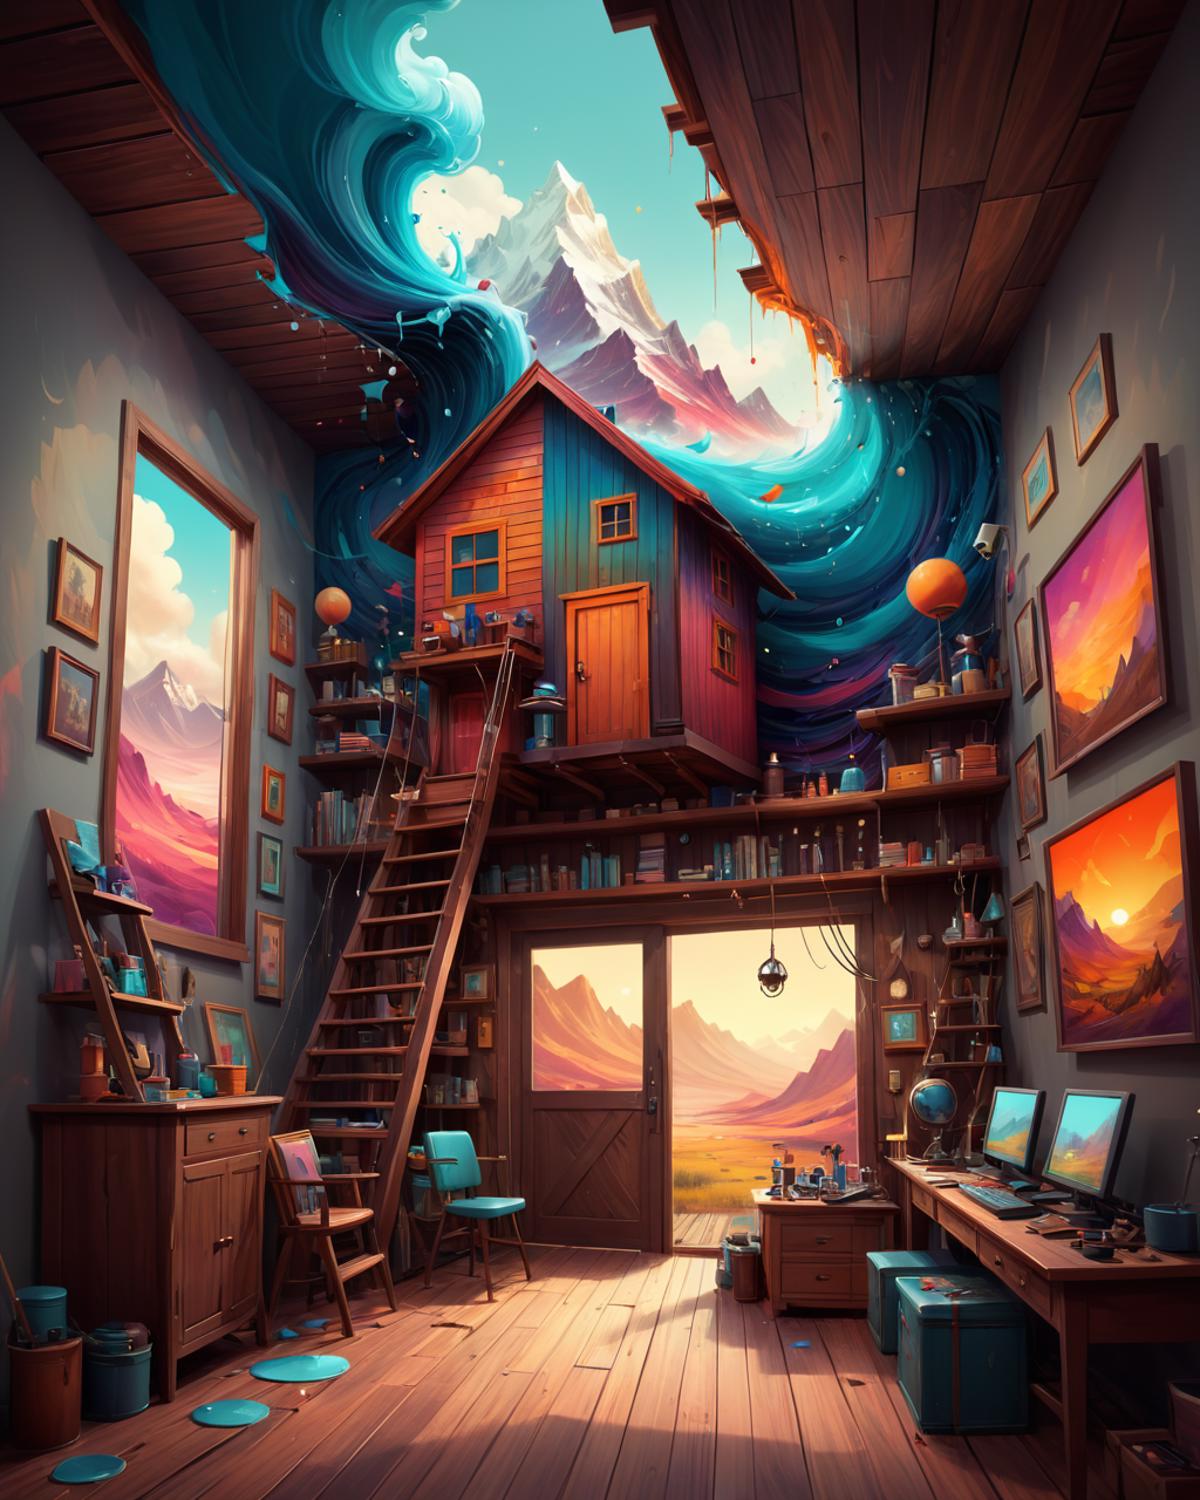 A colorful room with a painting of a house, a staircase, and a computer desk with a keyboard.